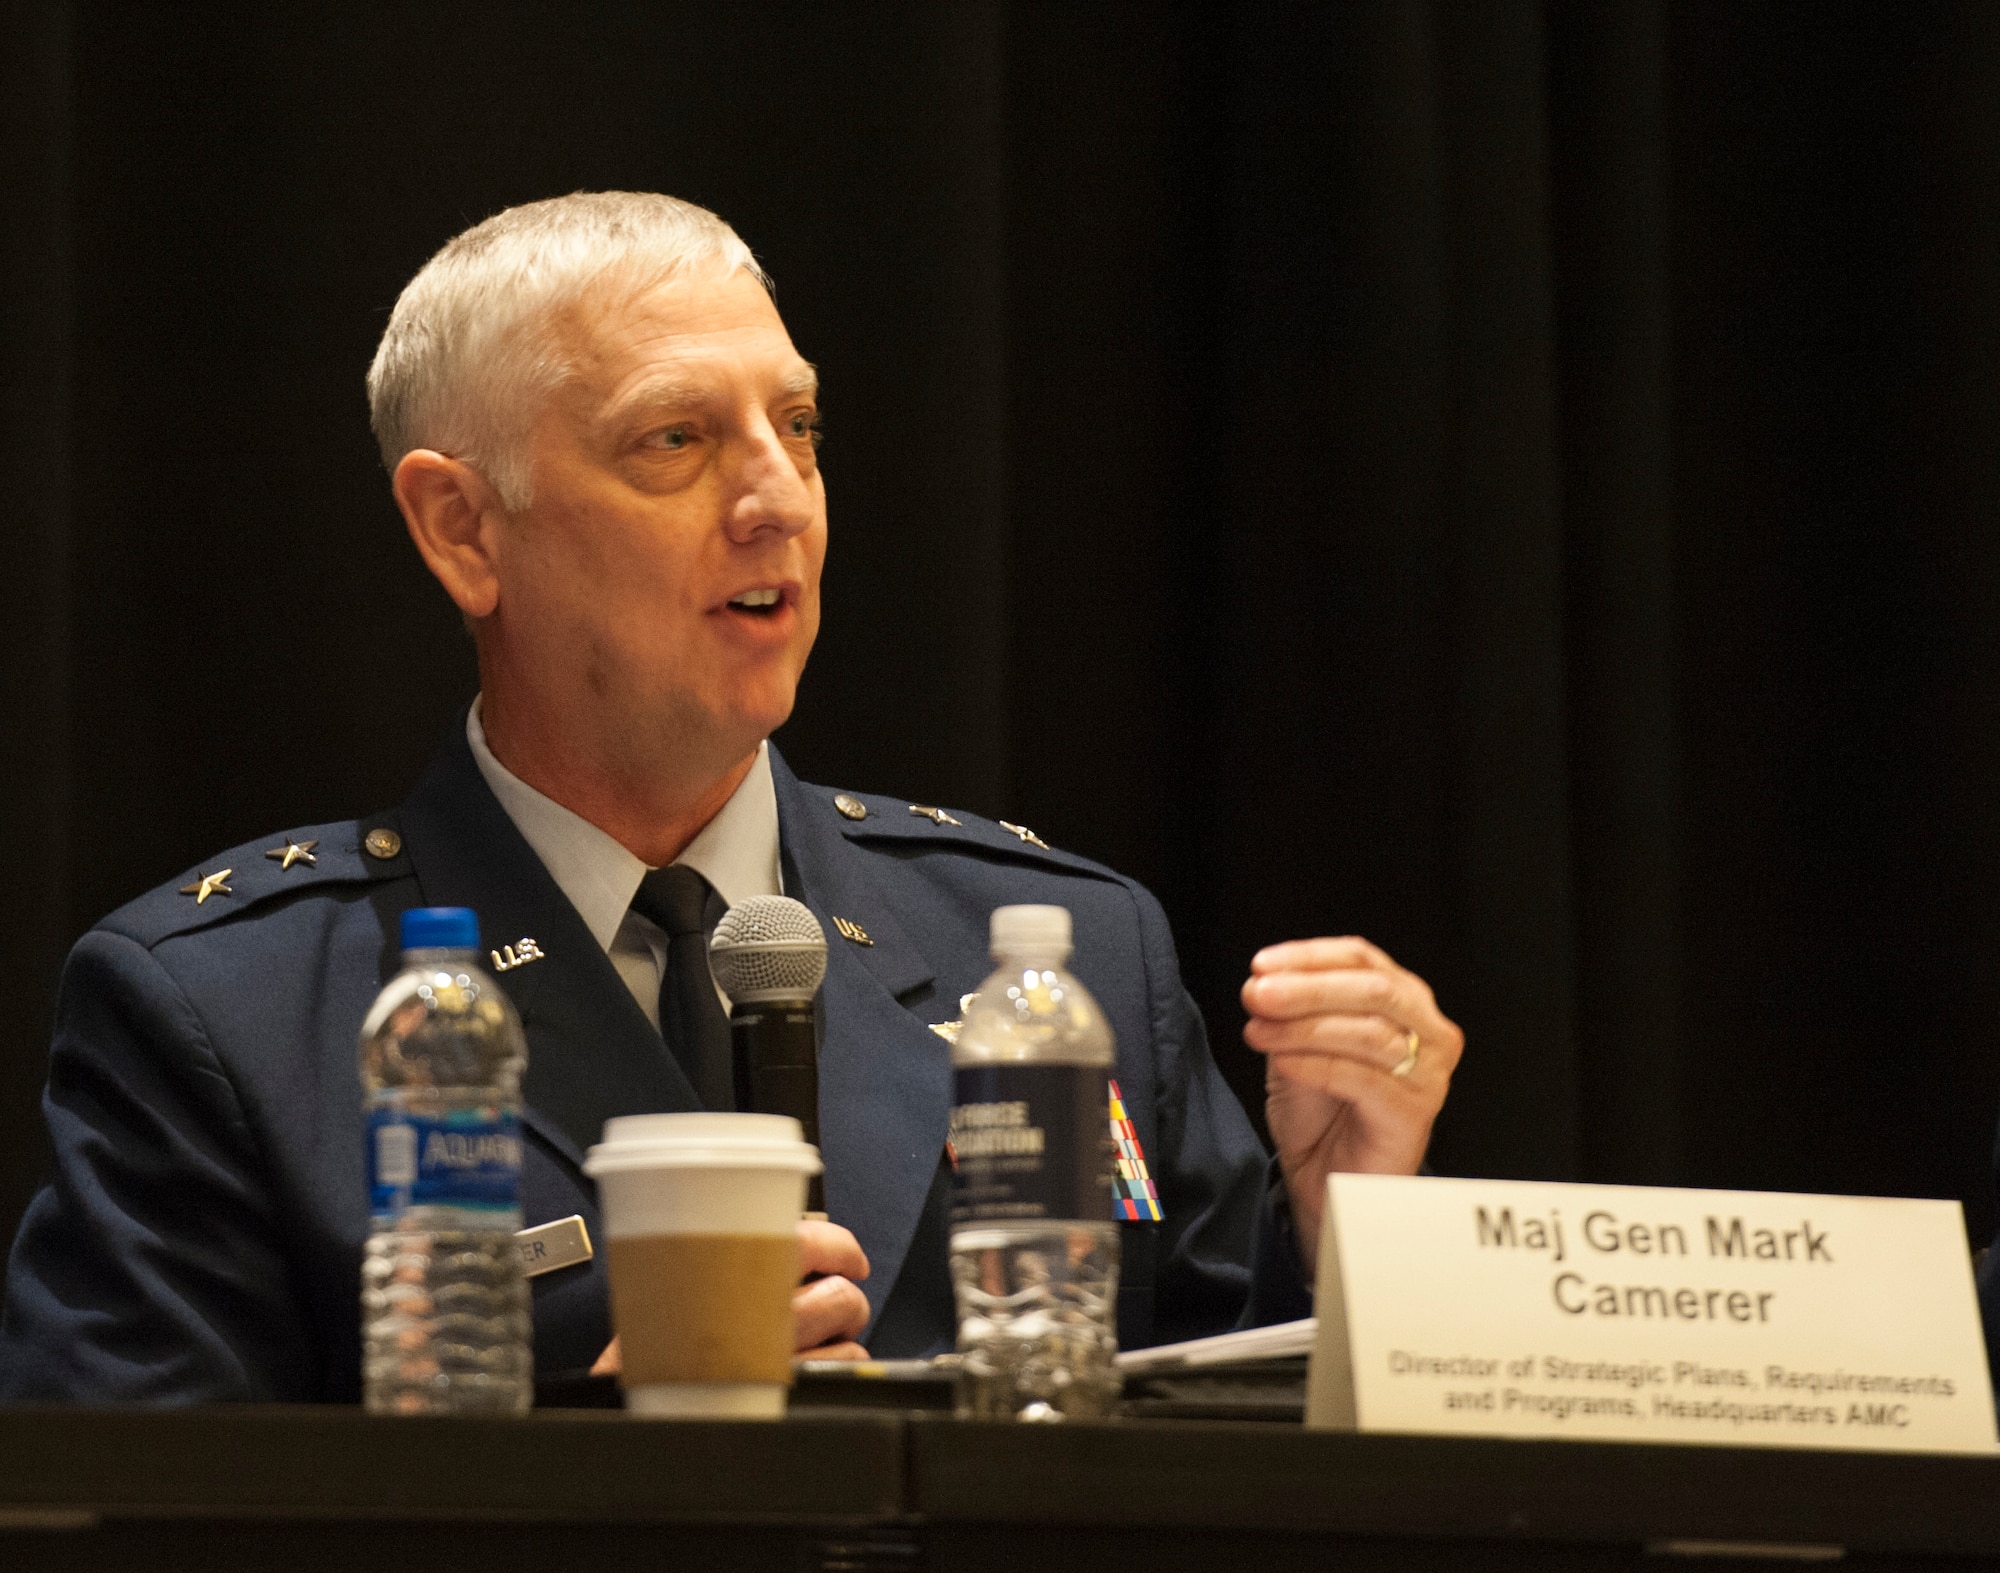 Maj. Gen. Mark Camerer, Air Mobility Command strategic plans, requirements and programs director, participates in the Expanding the Competitive Airlift Edge panel during the Air Force Association Air, Space and Cyber Conference in National Harbor, Md., Sept. 17, 2019. The ASC Conference is a professional development conference that offers the opportunity for Department of Defense personnel to participate in forums, speeches and workshops. (U.S. Air Force photo by Tech. Sgt. Robert Barnett)